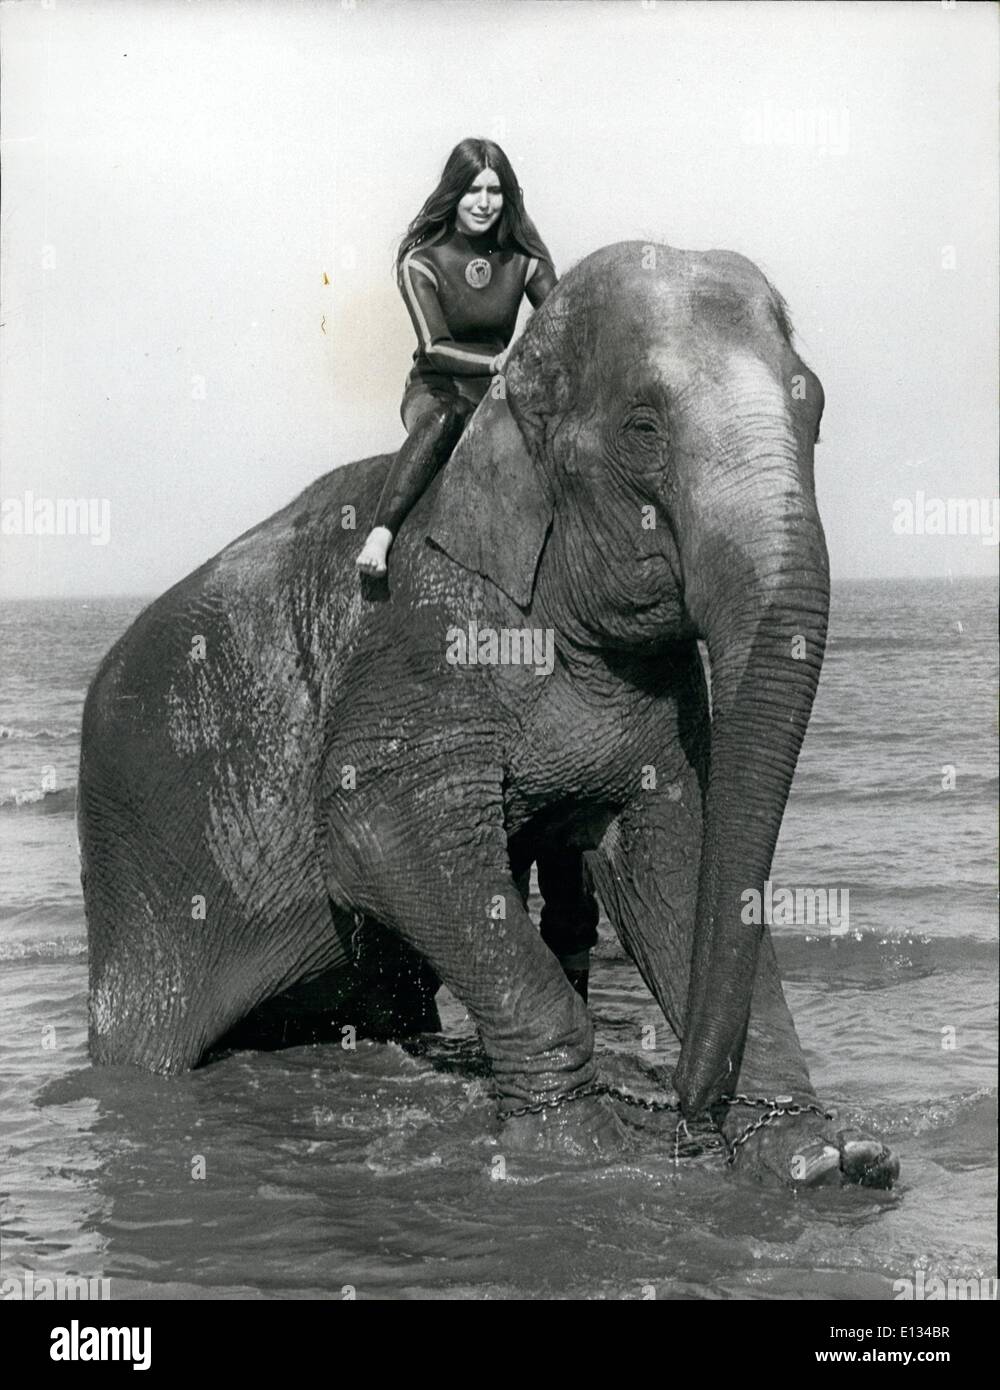 Feb. 26, 2012 - A stronge sight at sea - Linda persuades Tanya that bath time is over - so the elephant reluctantly rises to go Stock Photo